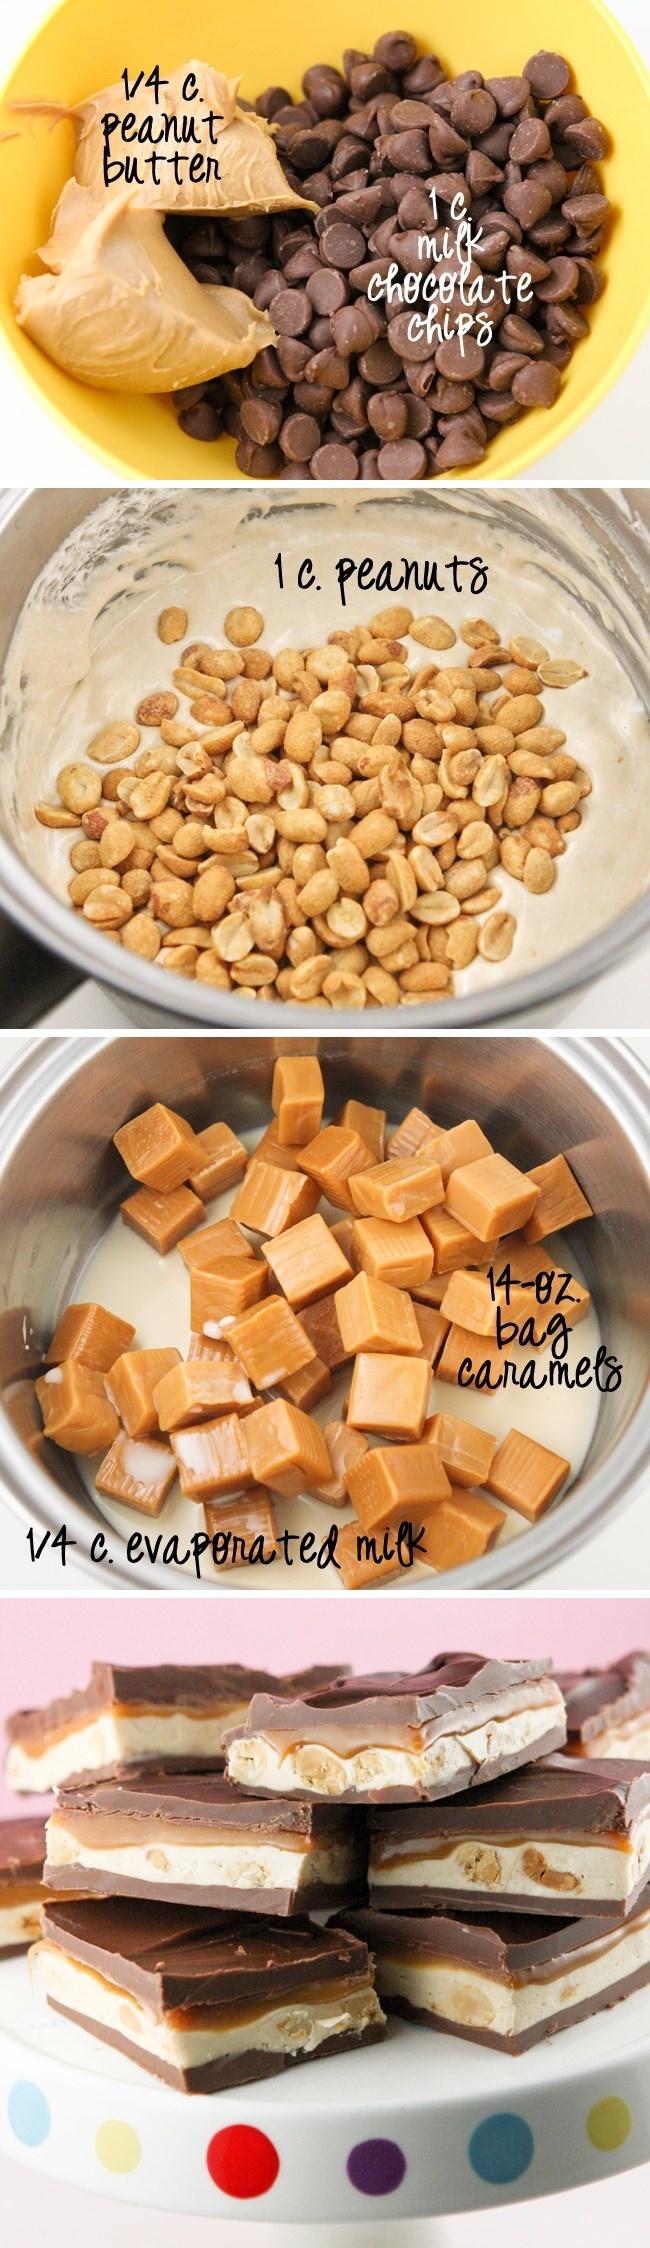 Candy Bar Fudge 4-1/3 cups semi-sweet chocolate chips, divided 1 14-oz can condensed milk 1/4 cup (4 tablespoons) butter 45 Individually wrapped caramels 1-1/2 tablespoons water 1-1/4 cups salted